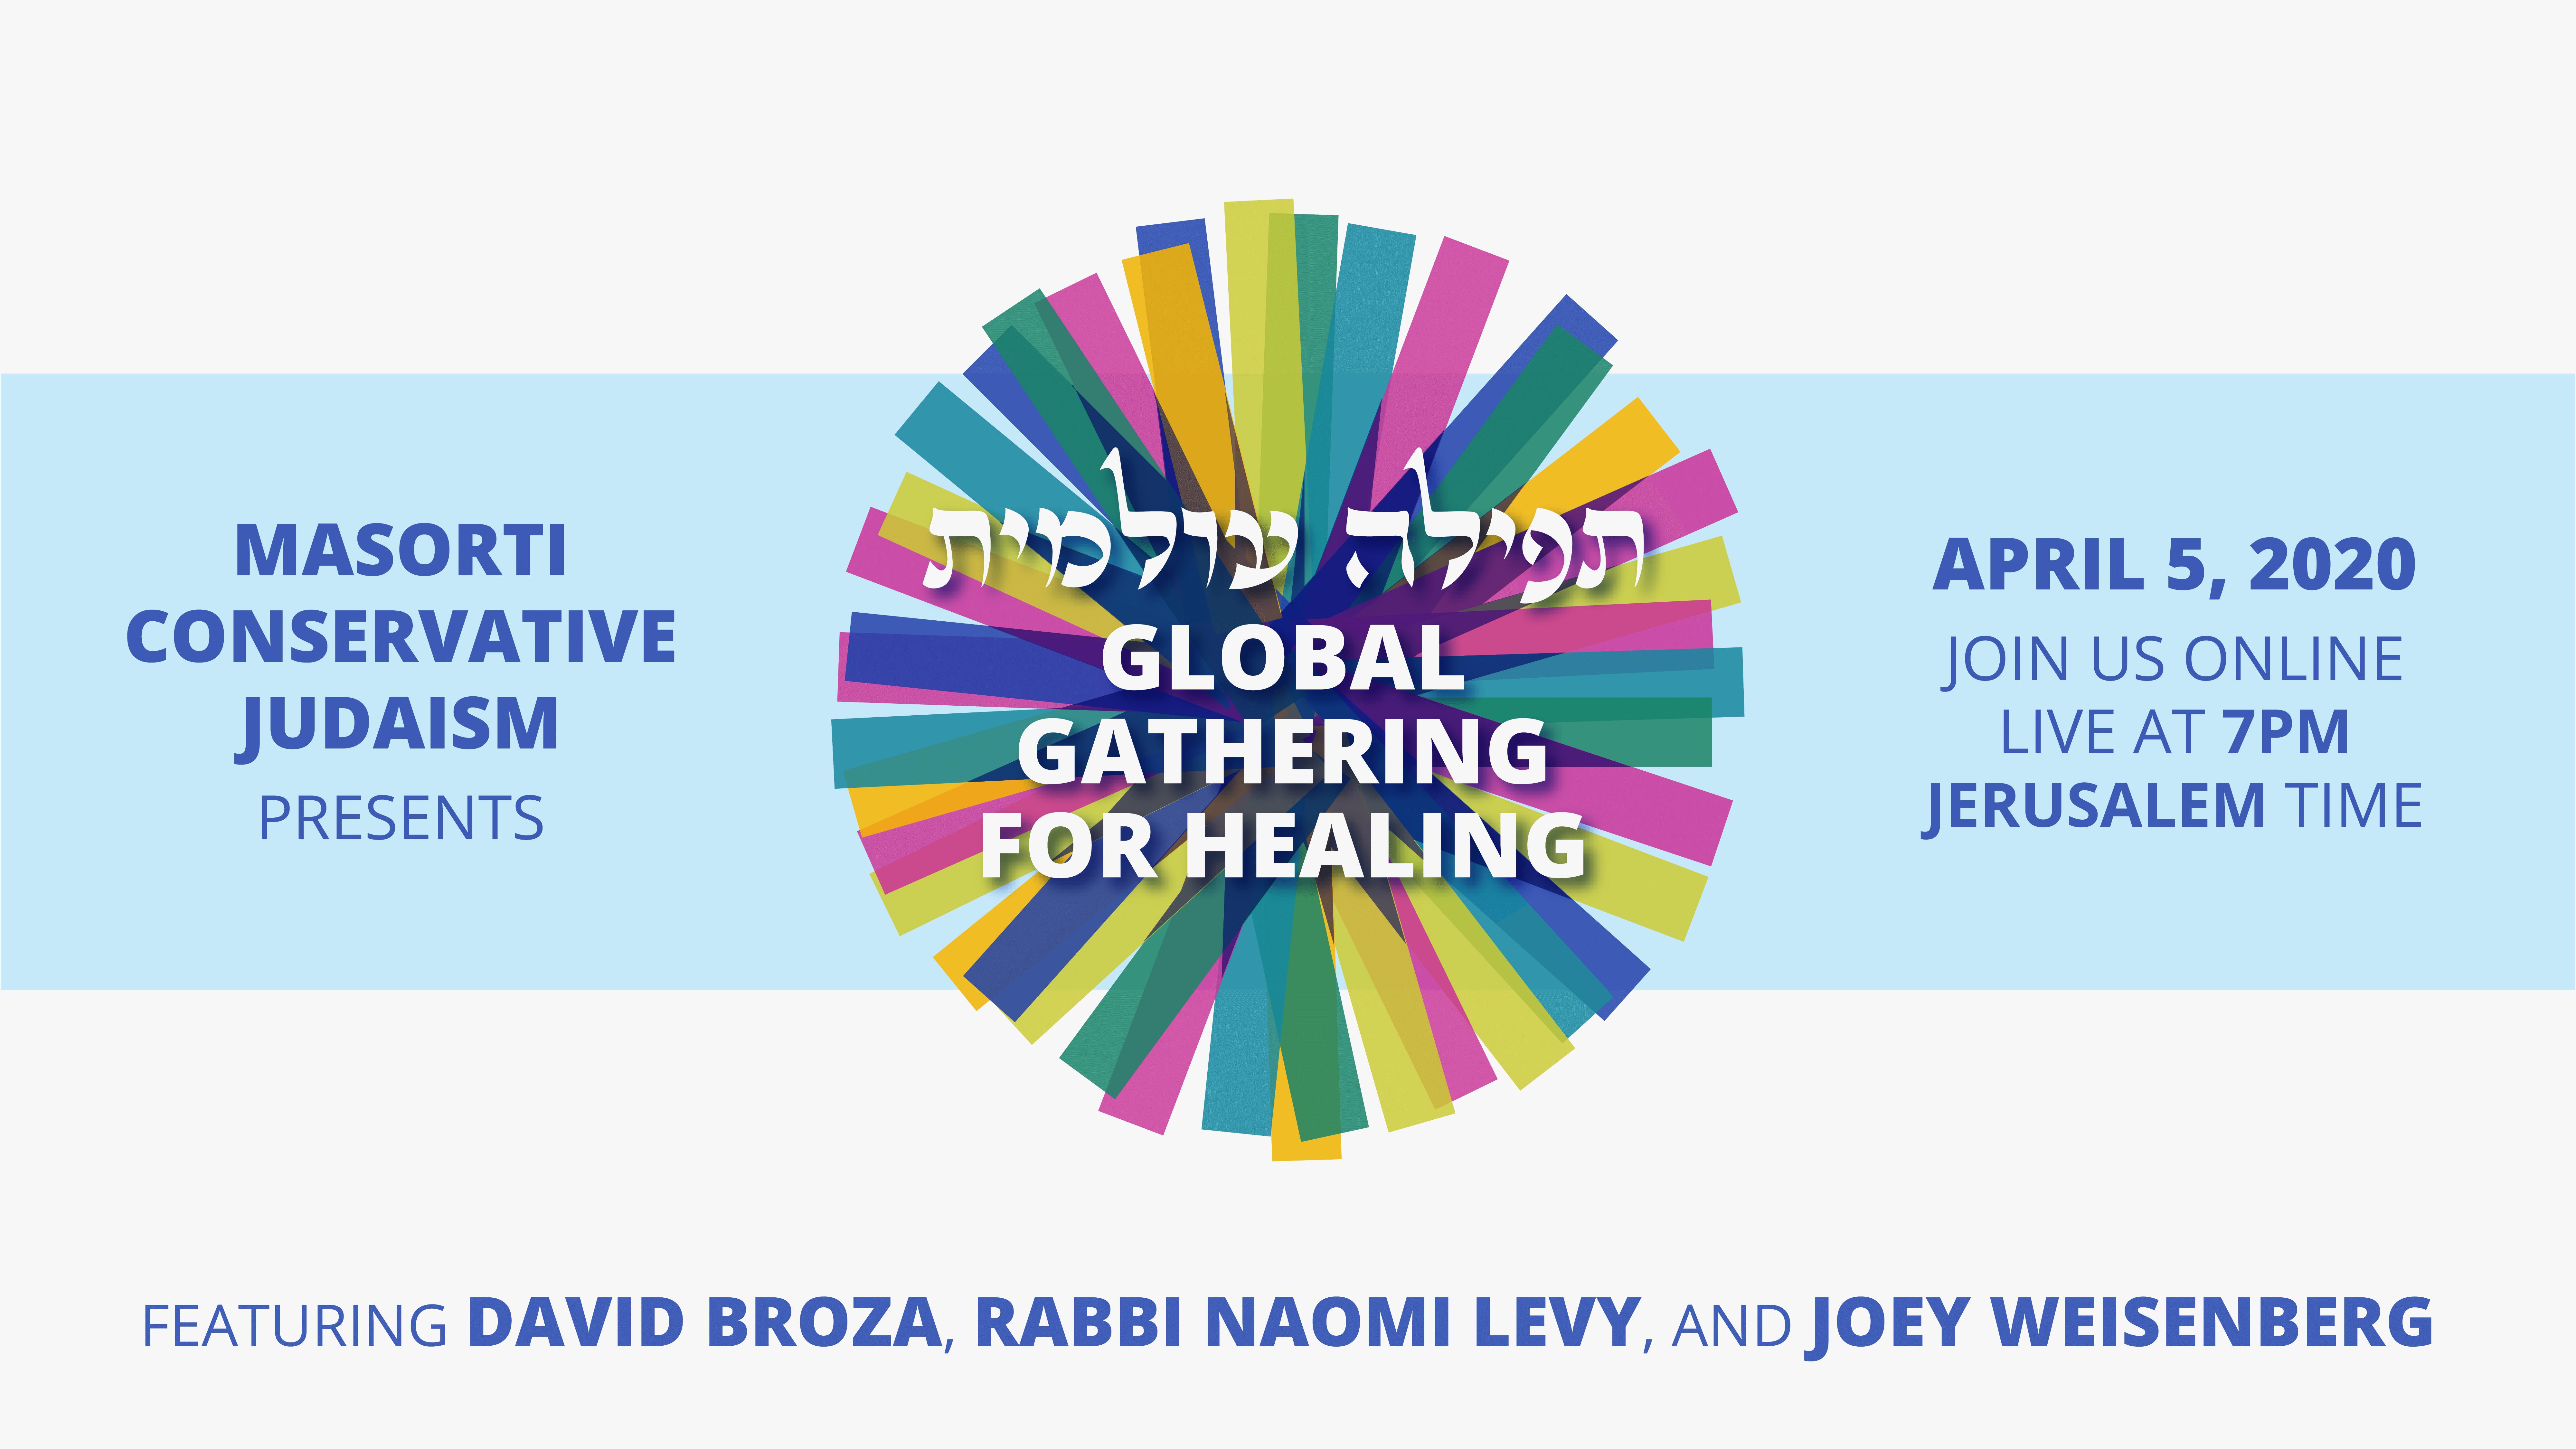 Masorti/Conservative Judaism Around the World to Unite For Virtual  “Global Gathering For Healing”